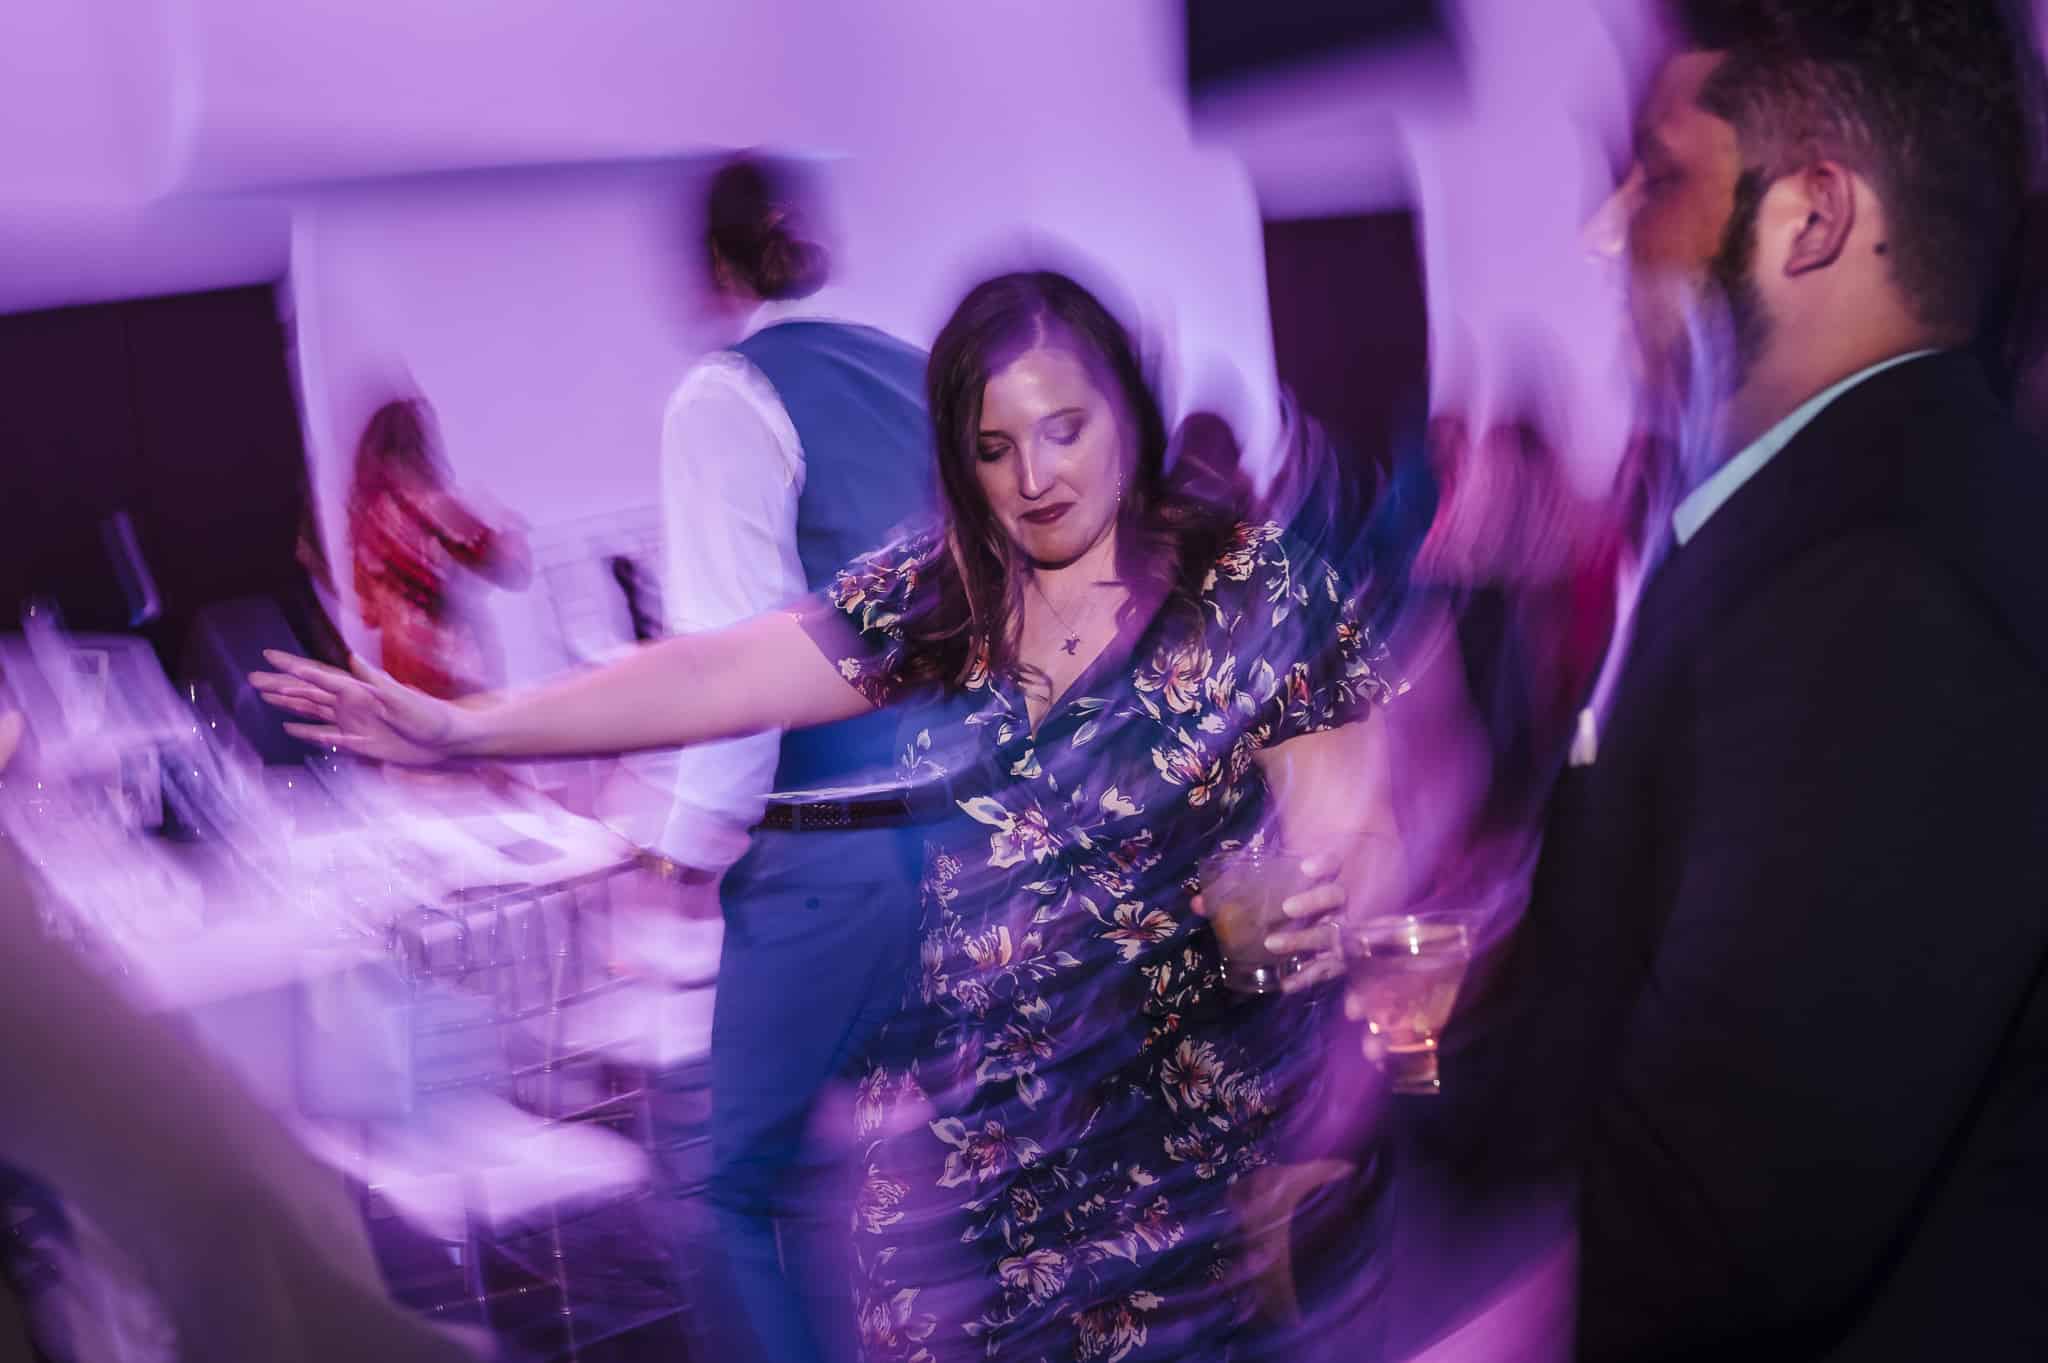 Motion blur of a woman dancing at a wedding.